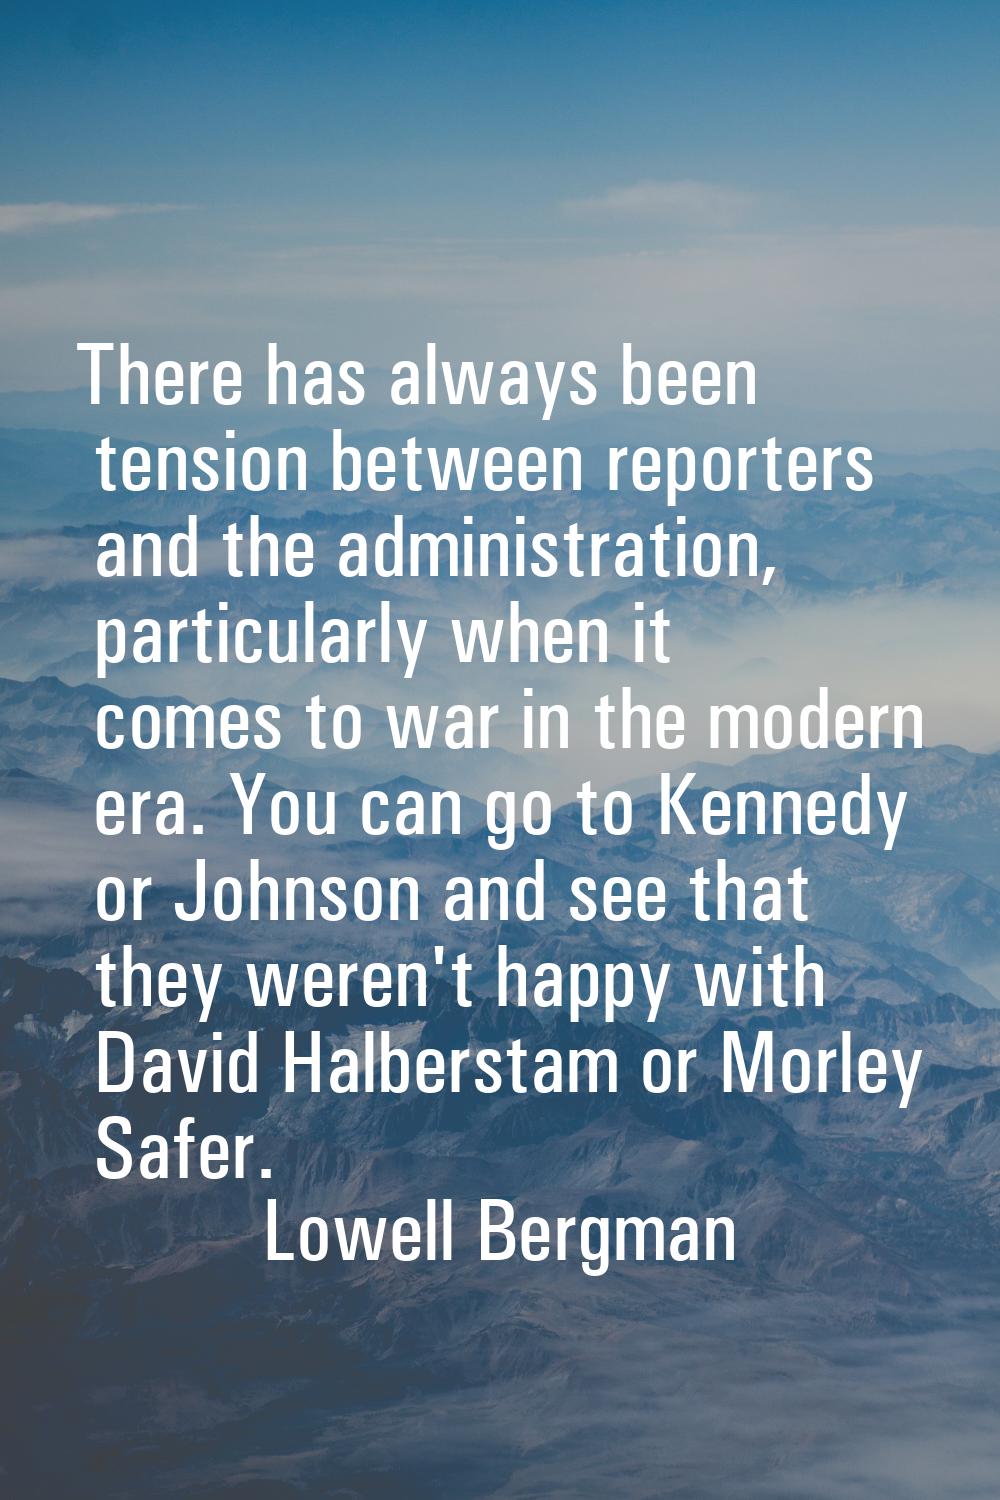 There has always been tension between reporters and the administration, particularly when it comes 